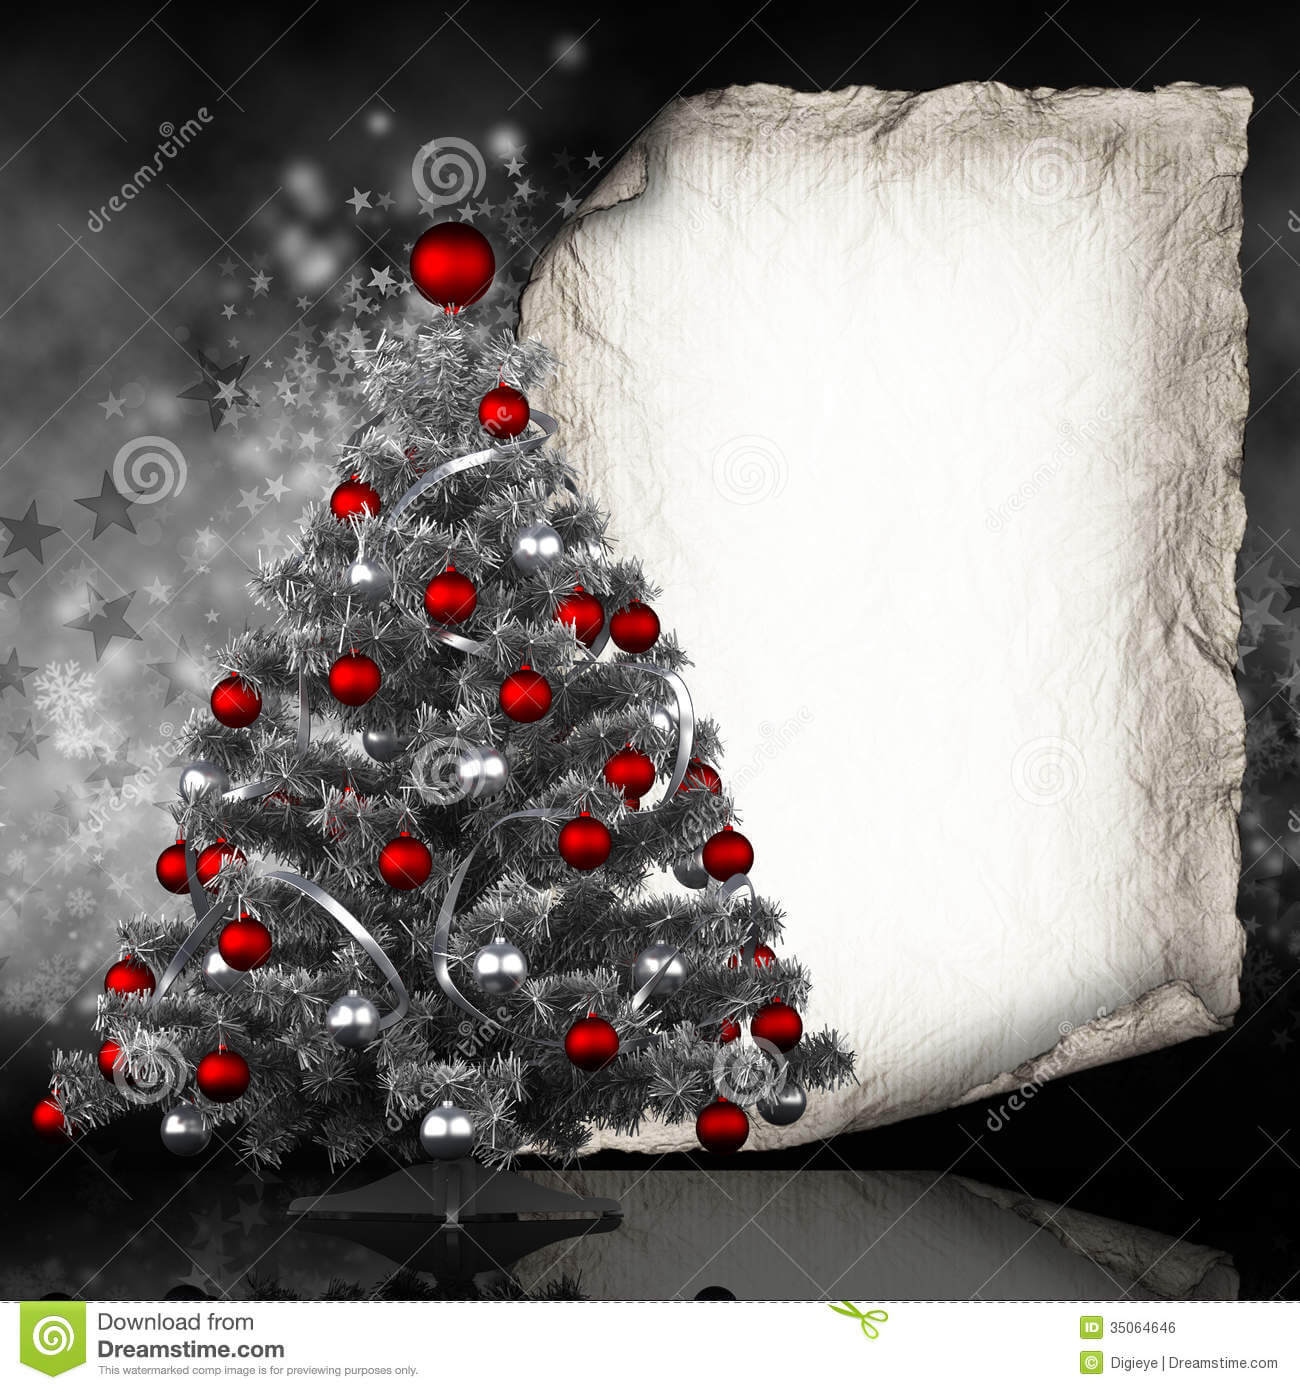 Frightening Christmas Cards Templates Free Downloads In Blank Christmas Card Templates Free